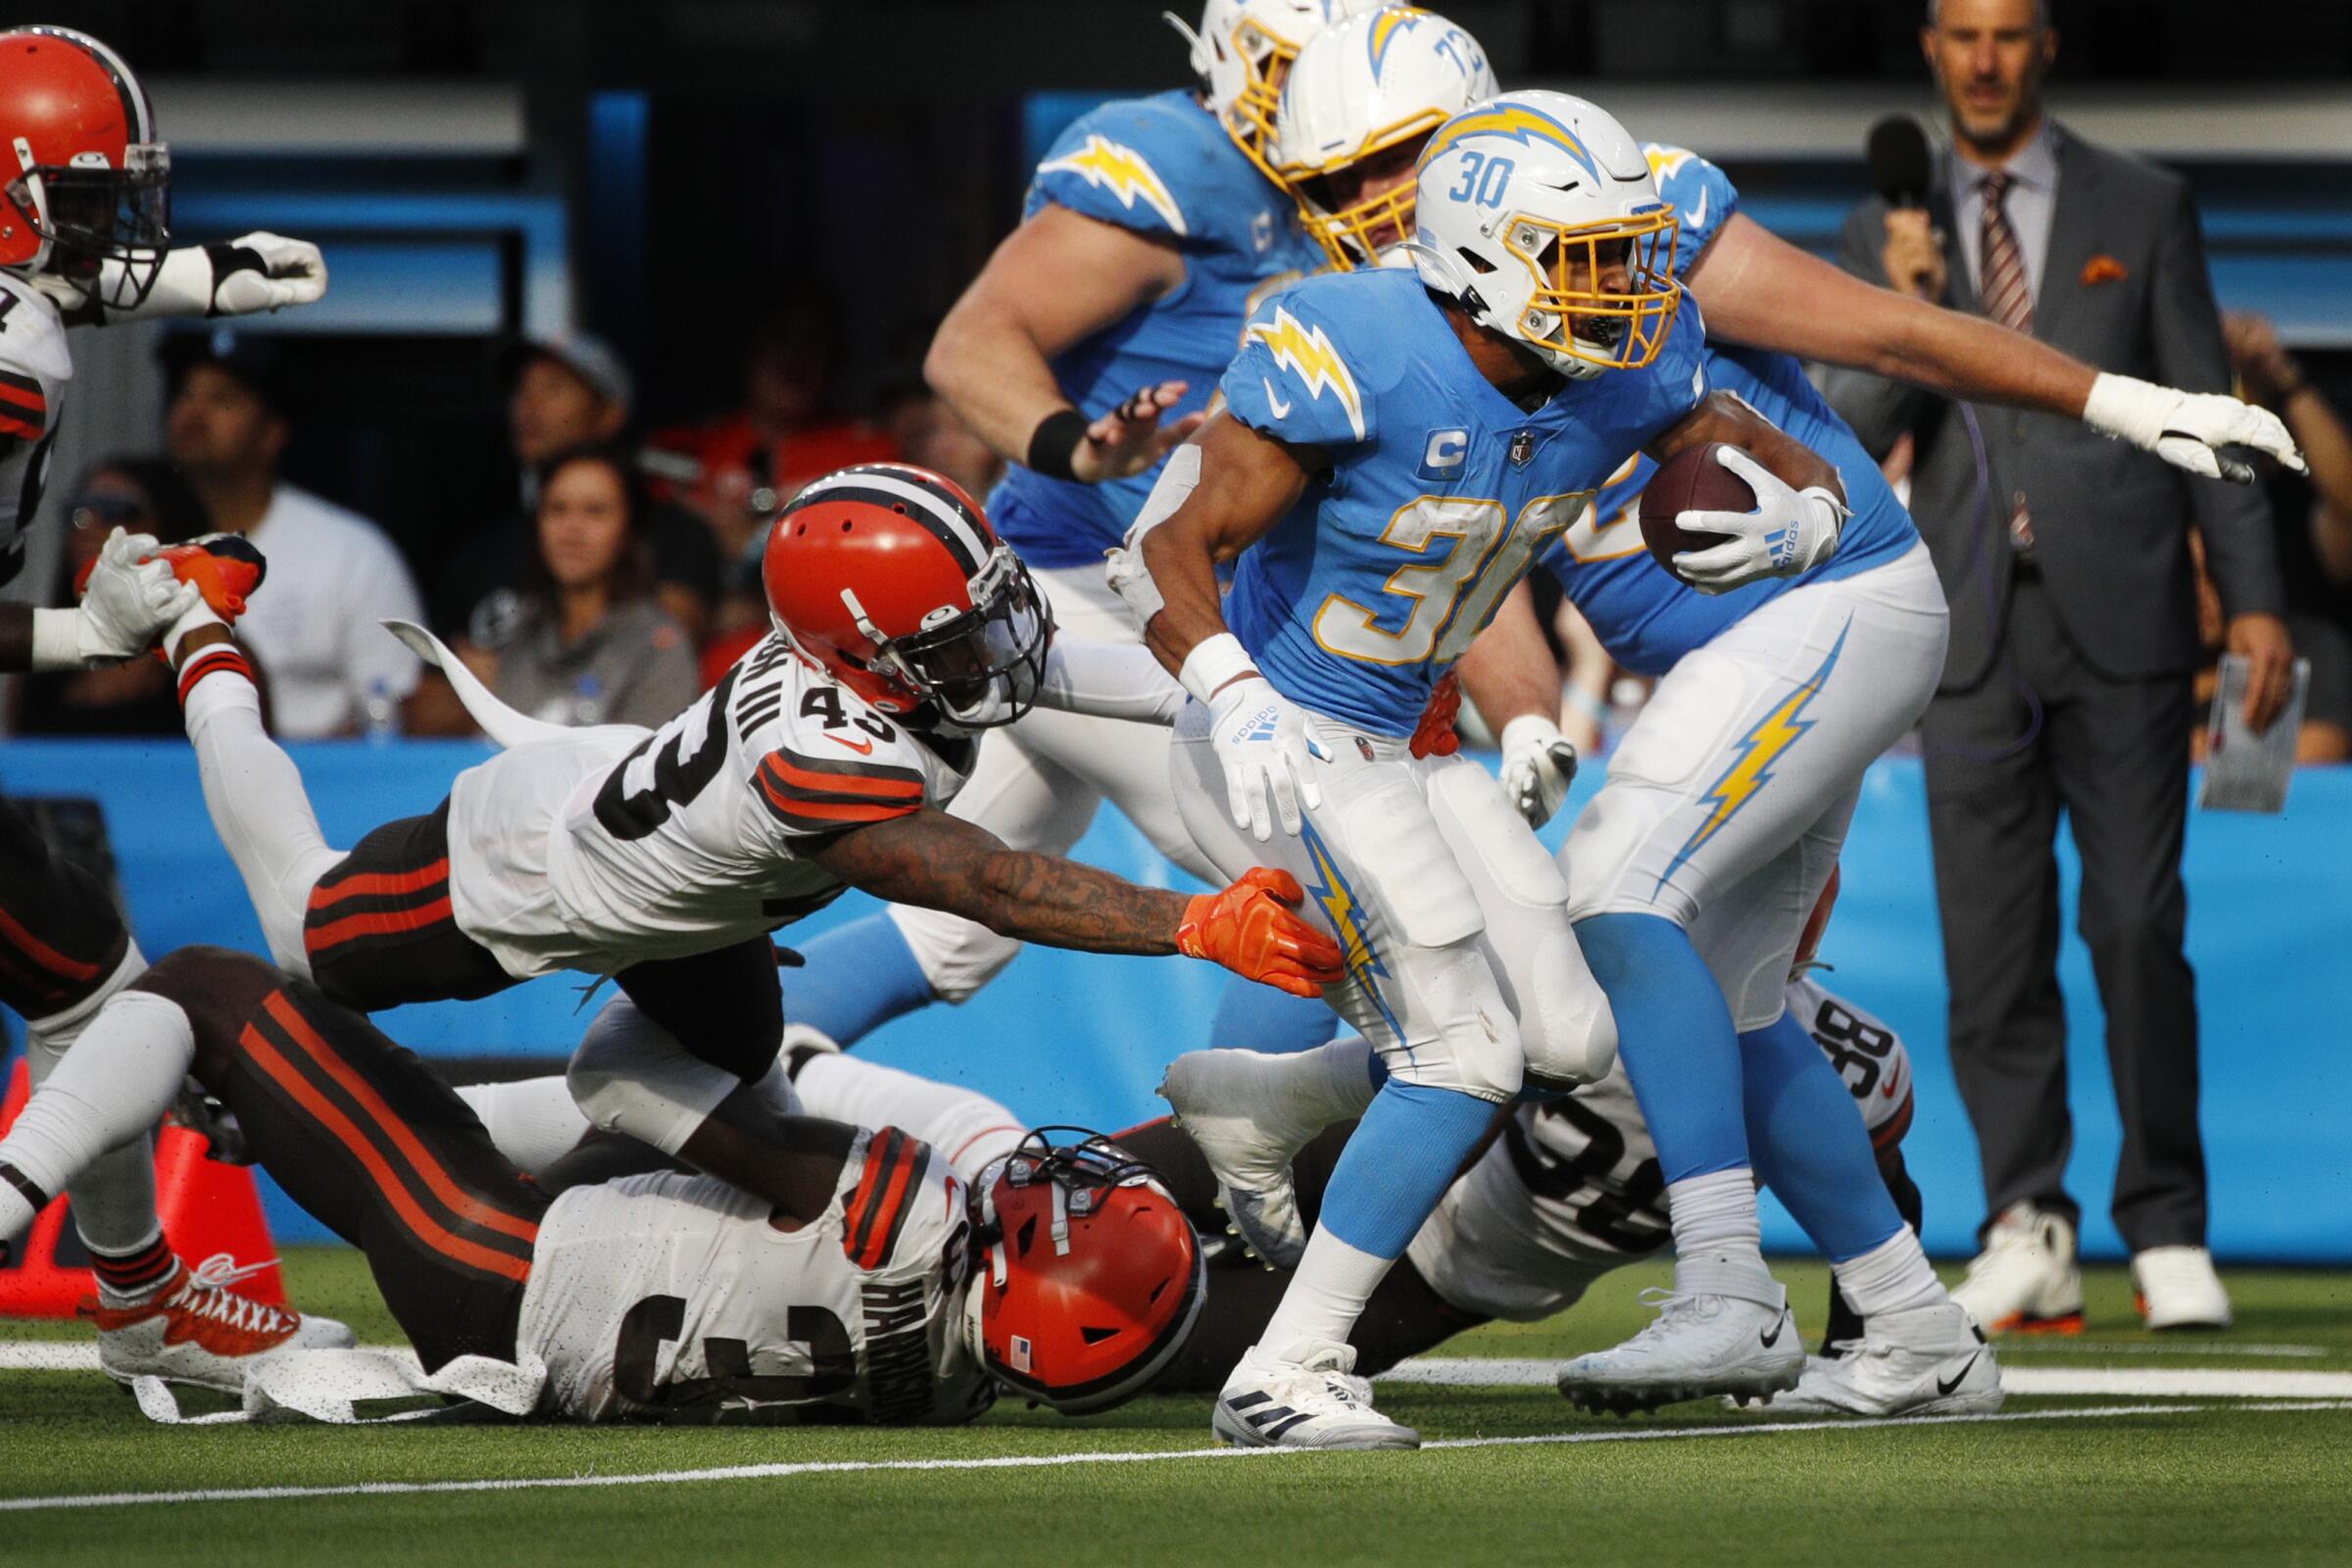 Chargers running back Austin Ekeler breaks free from the tackle attempt by Cleveland Browns free safety John Johnson.